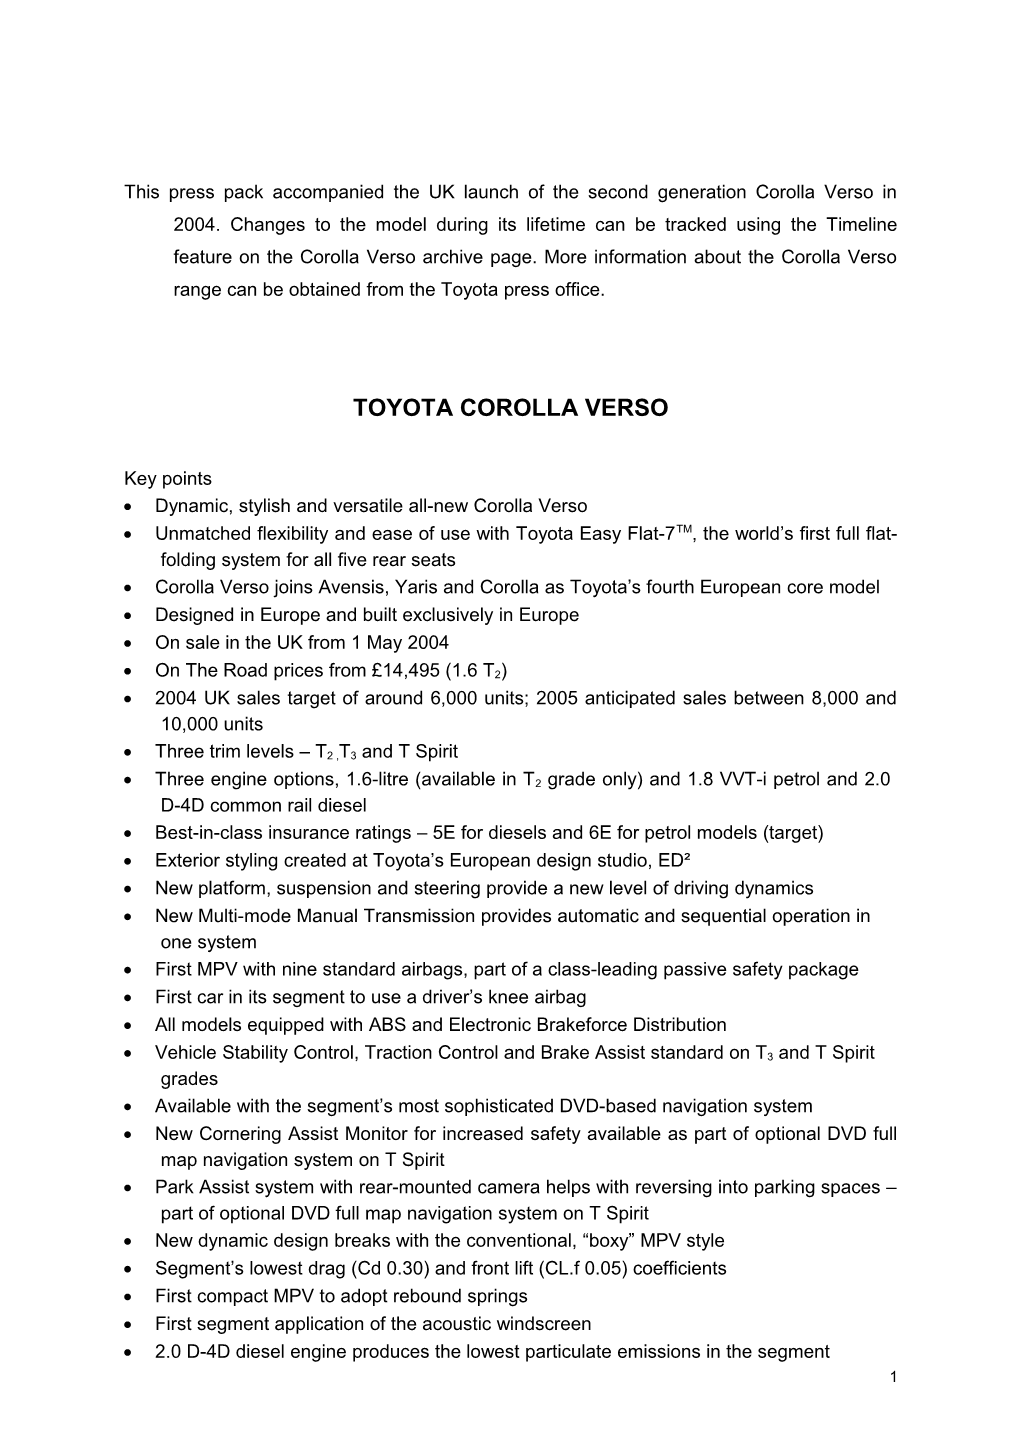 This Press Pack Accompanied the UK Launch of the Second Generation Corolla Verso in 2004